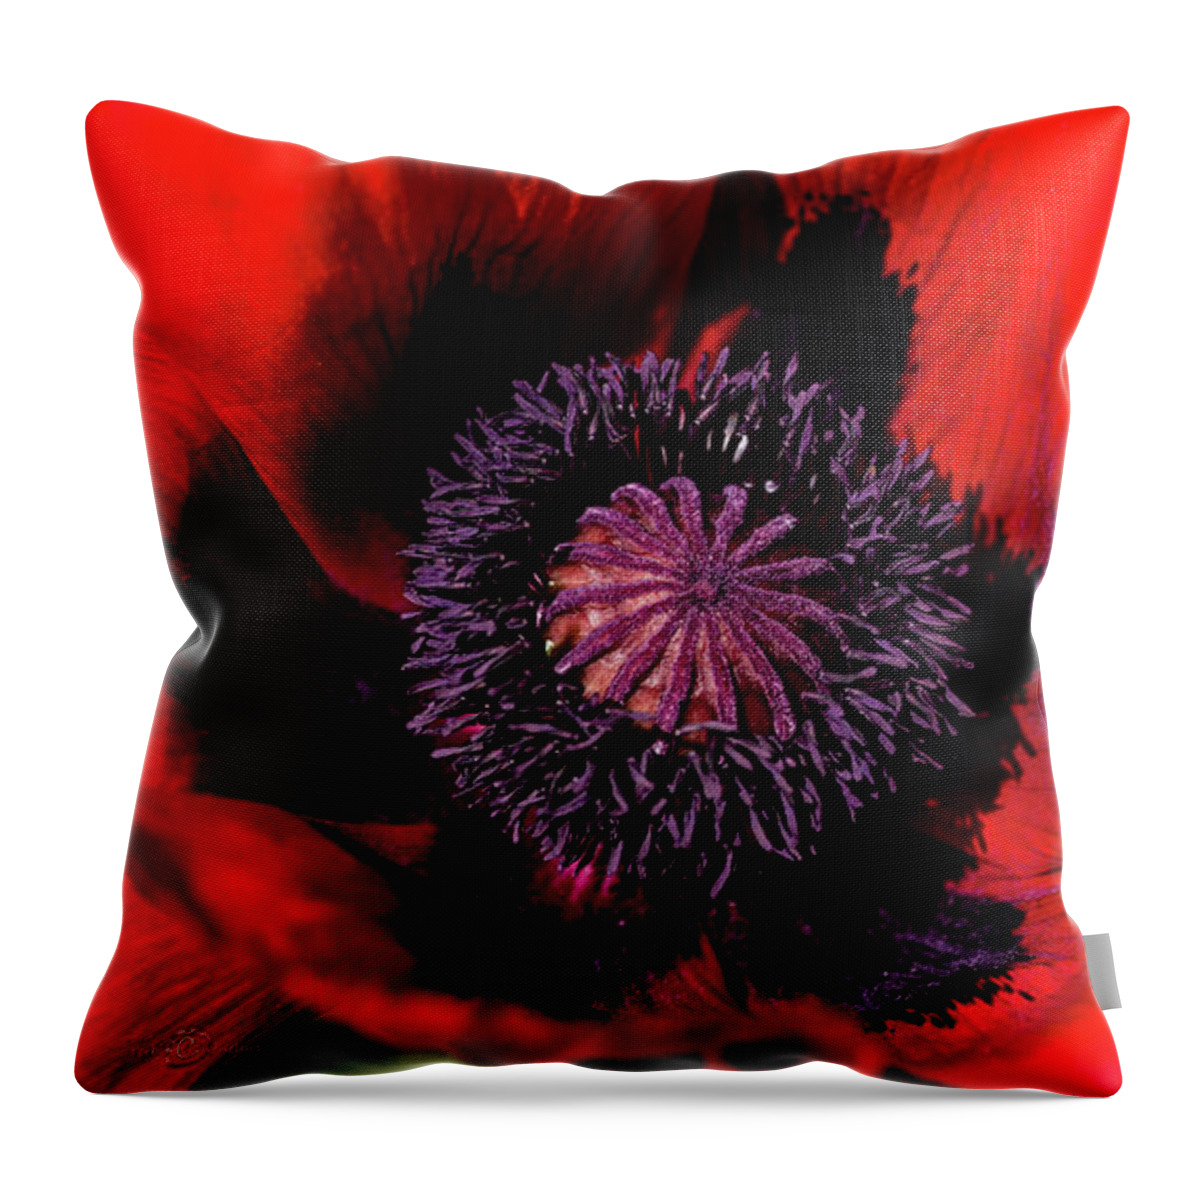 Poppy Throw Pillow featuring the photograph Poppy by Torbjorn Swenelius